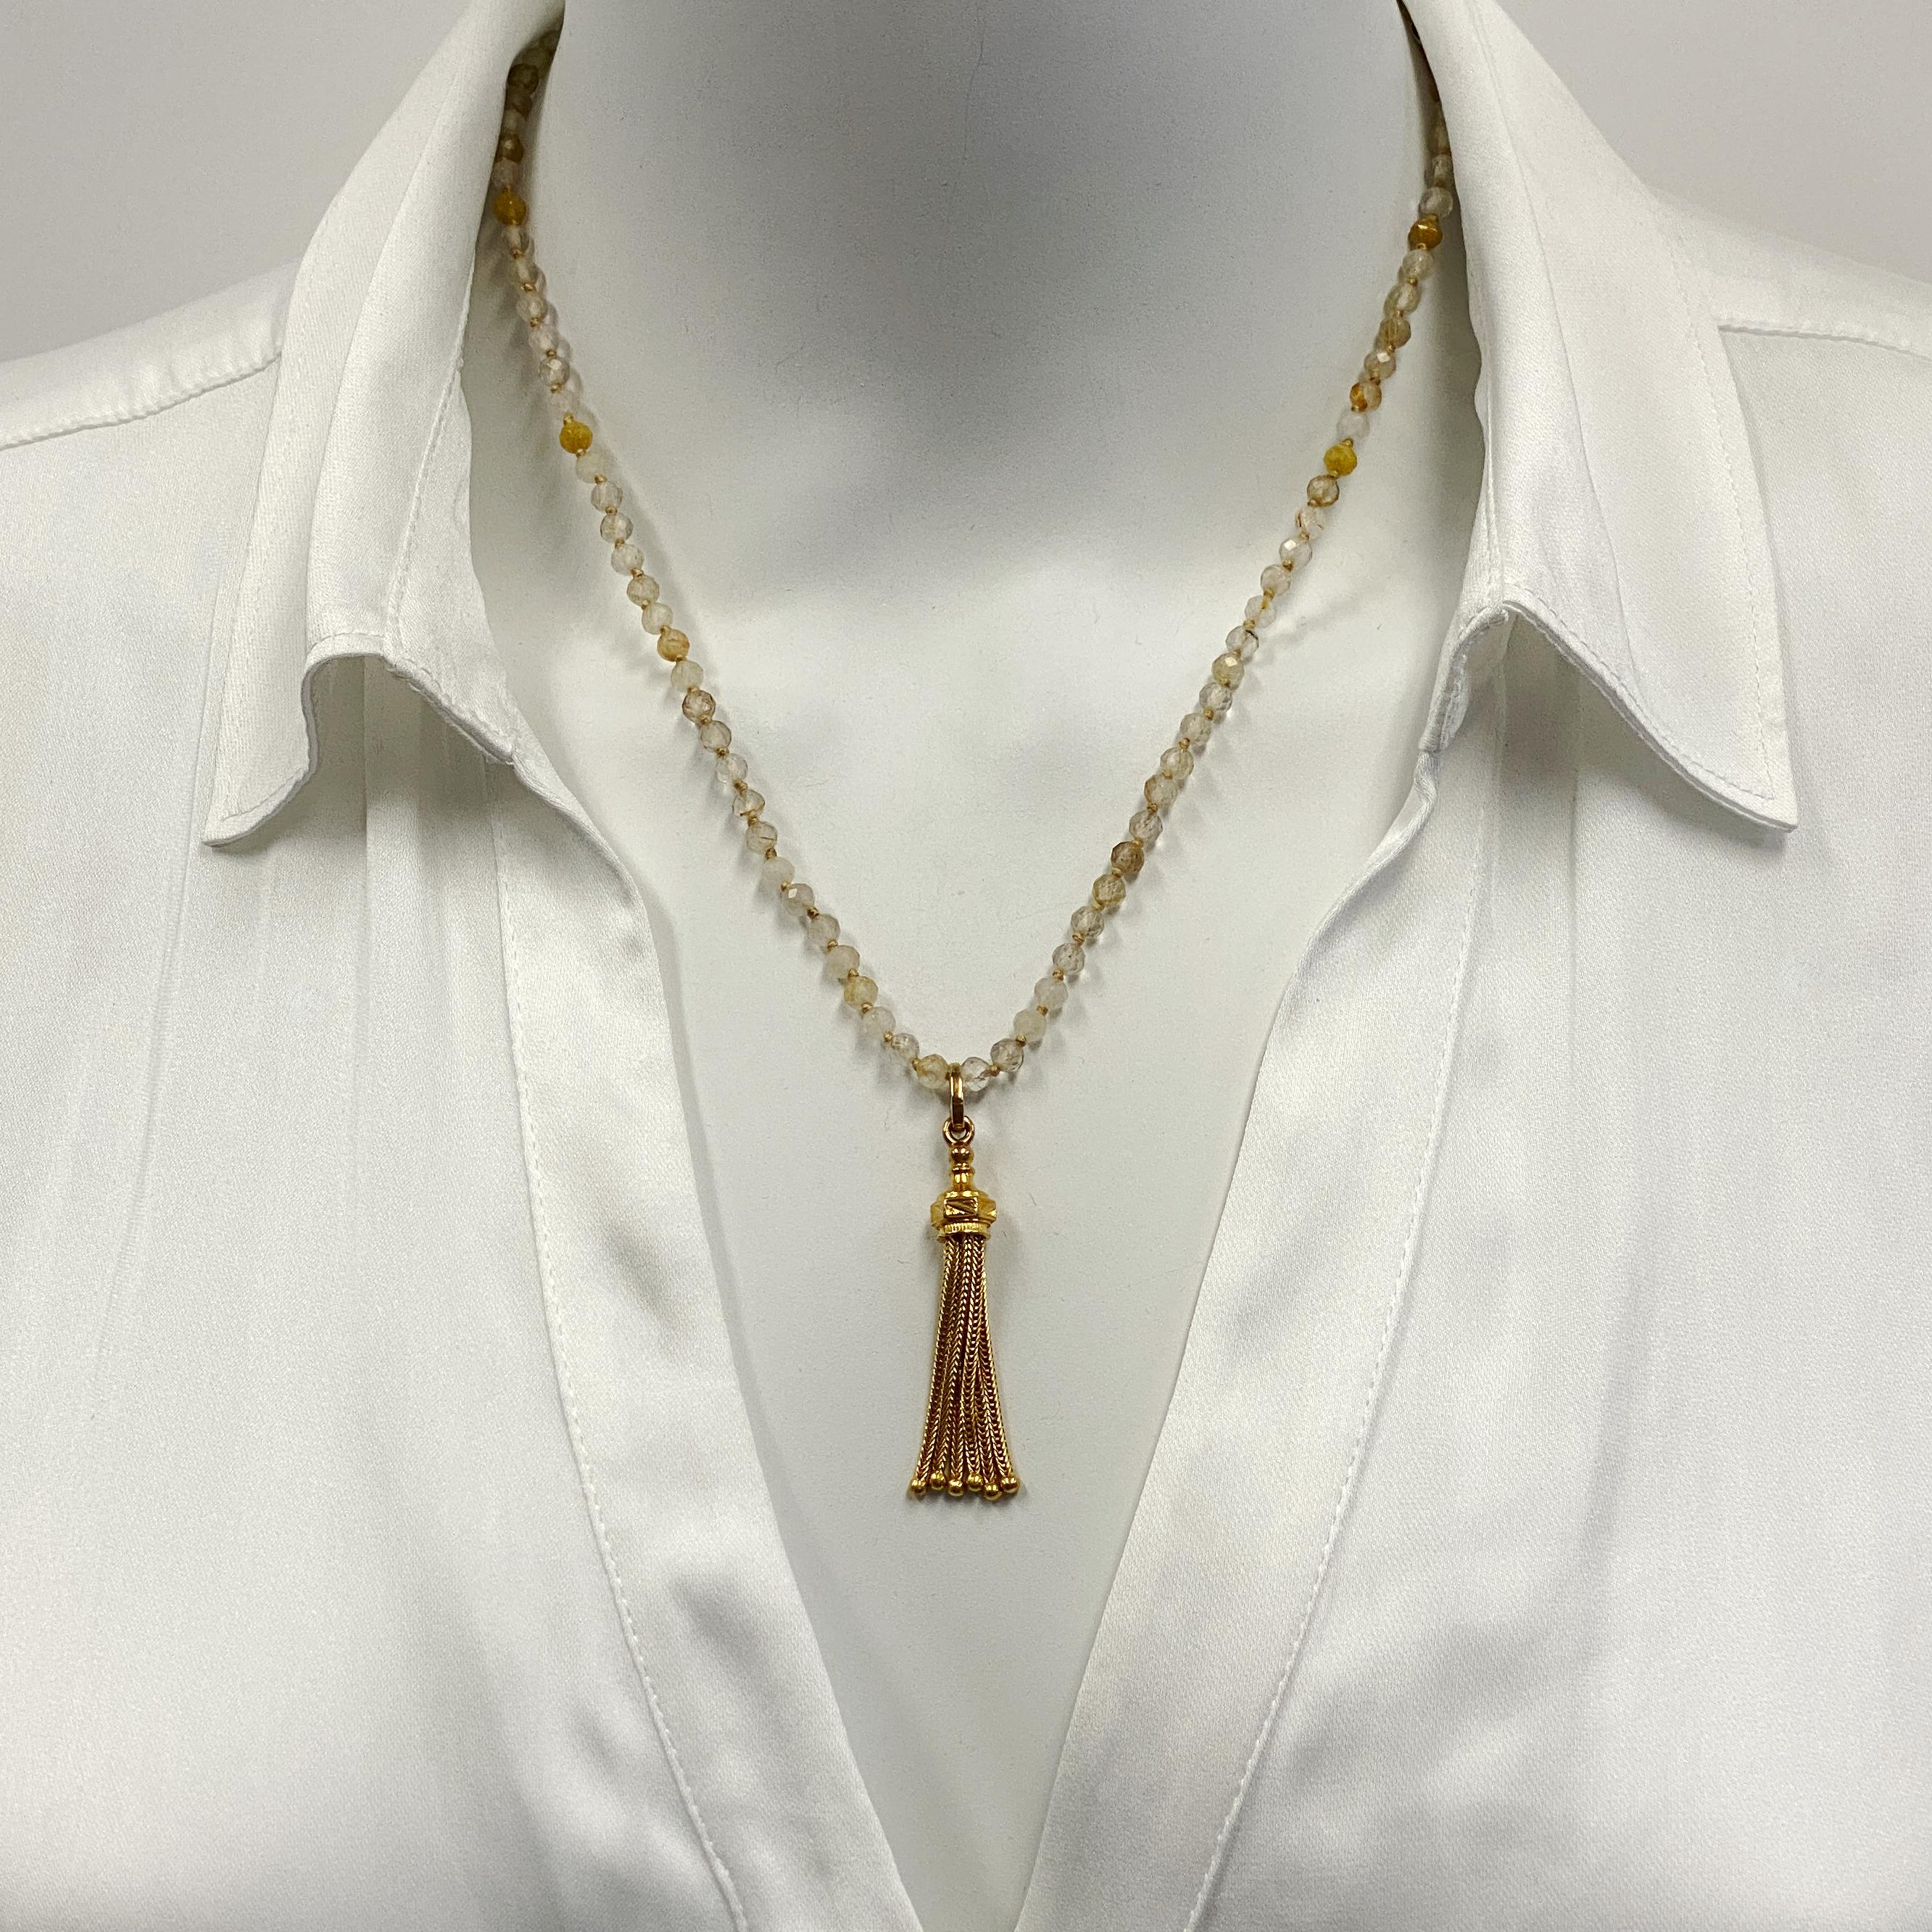 This versatile piece features an old 10 karat gold tassel which Eytan Brandes converted to a pendant with a big top loop -- big enough to accommodate many different chain options.

We've paired it with a string of fully knotted, natural pale yellow